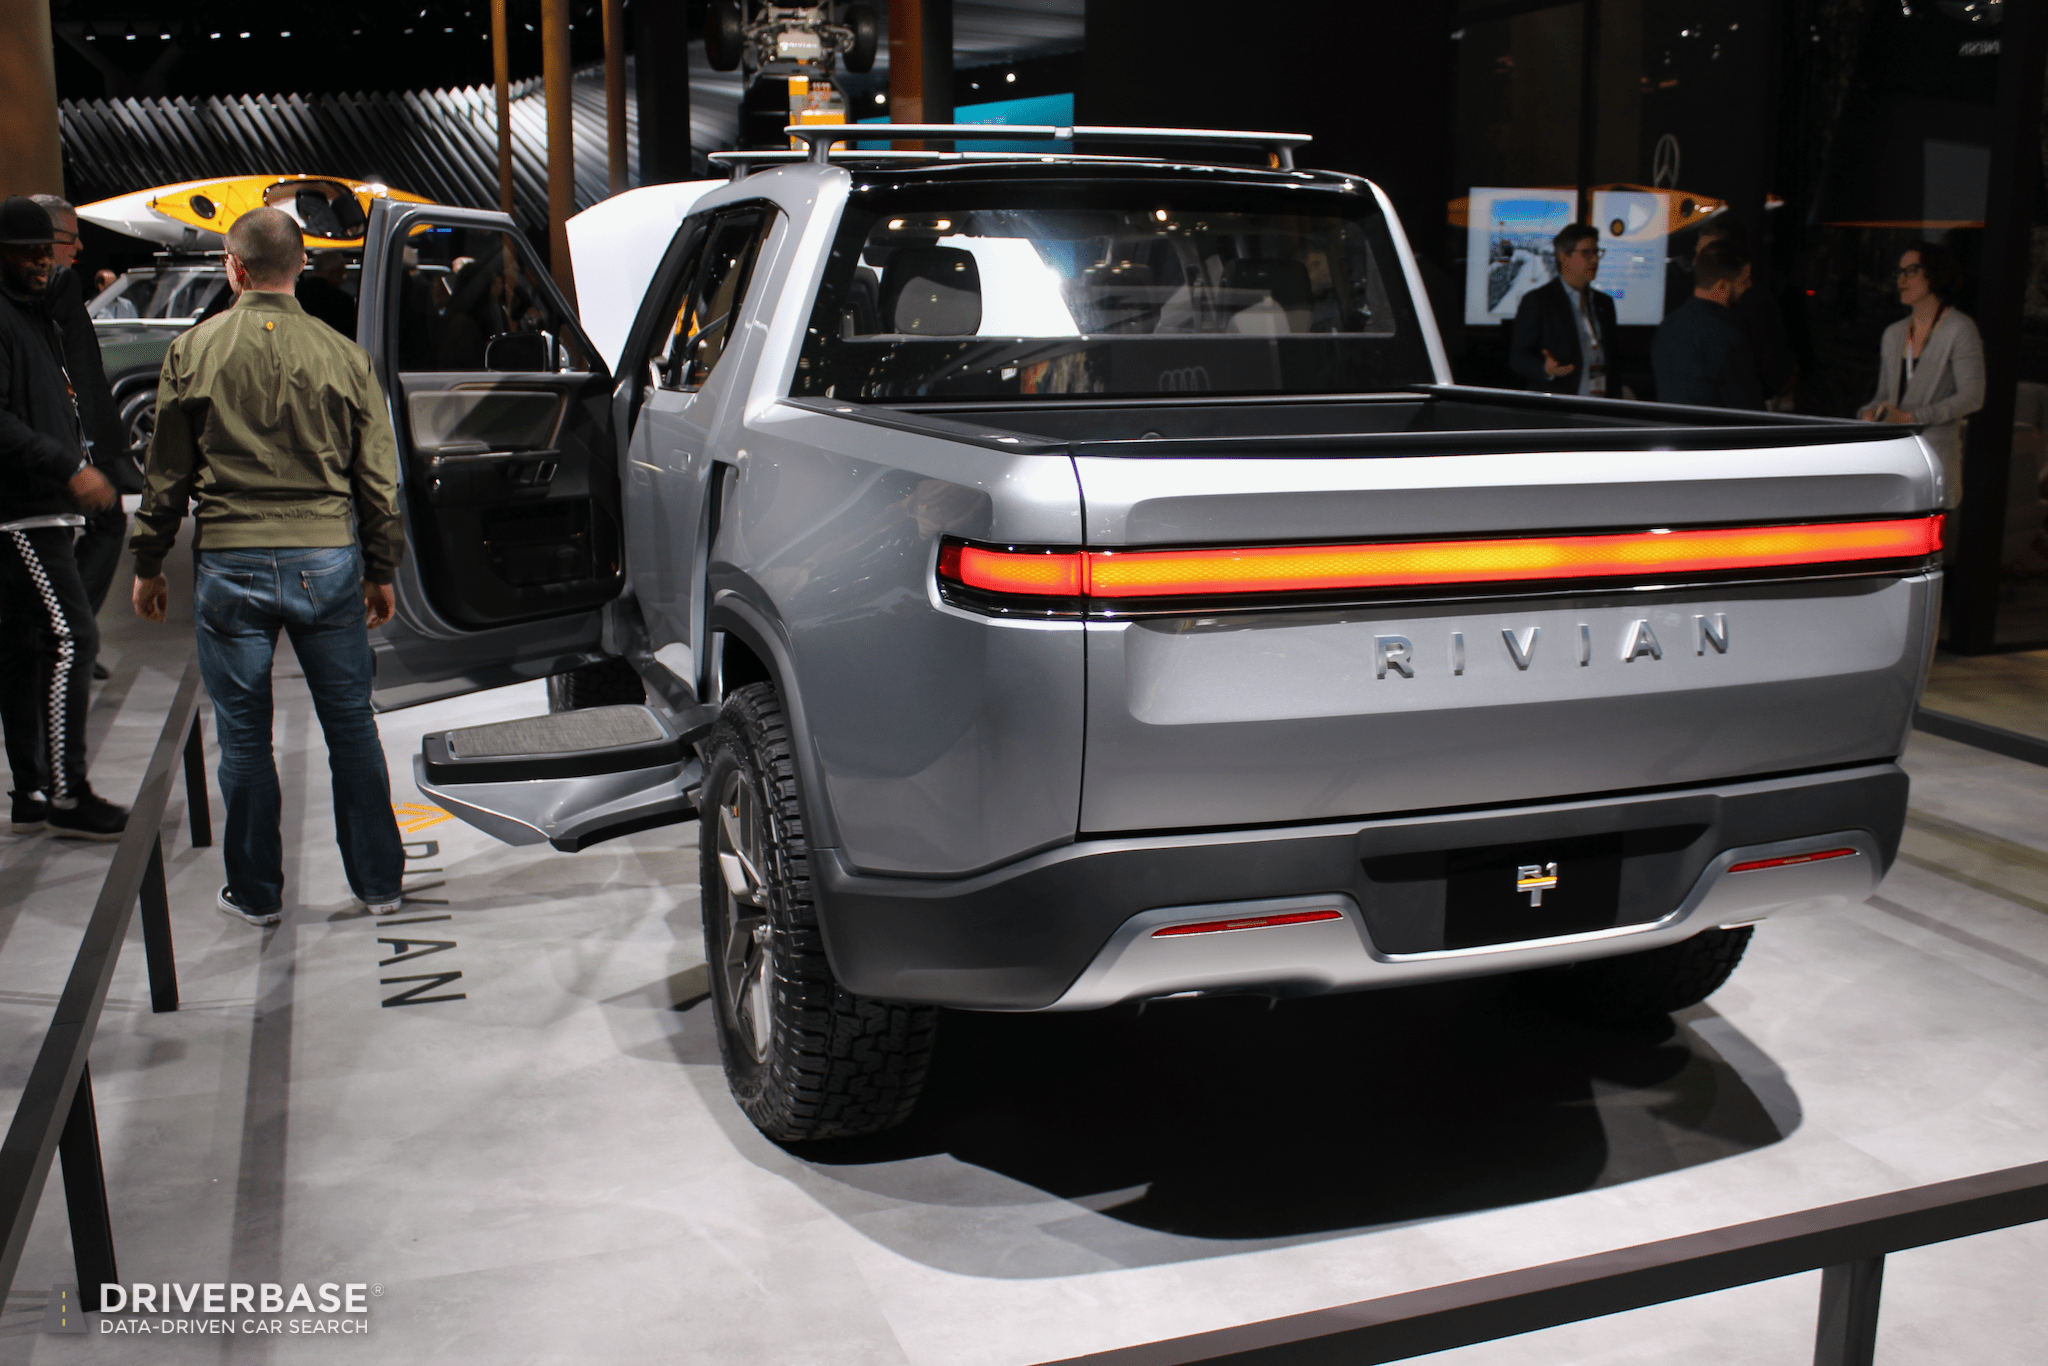 2019 Rivian R1T Electric Truck at the 2019 New York Auto Show - Driverbase